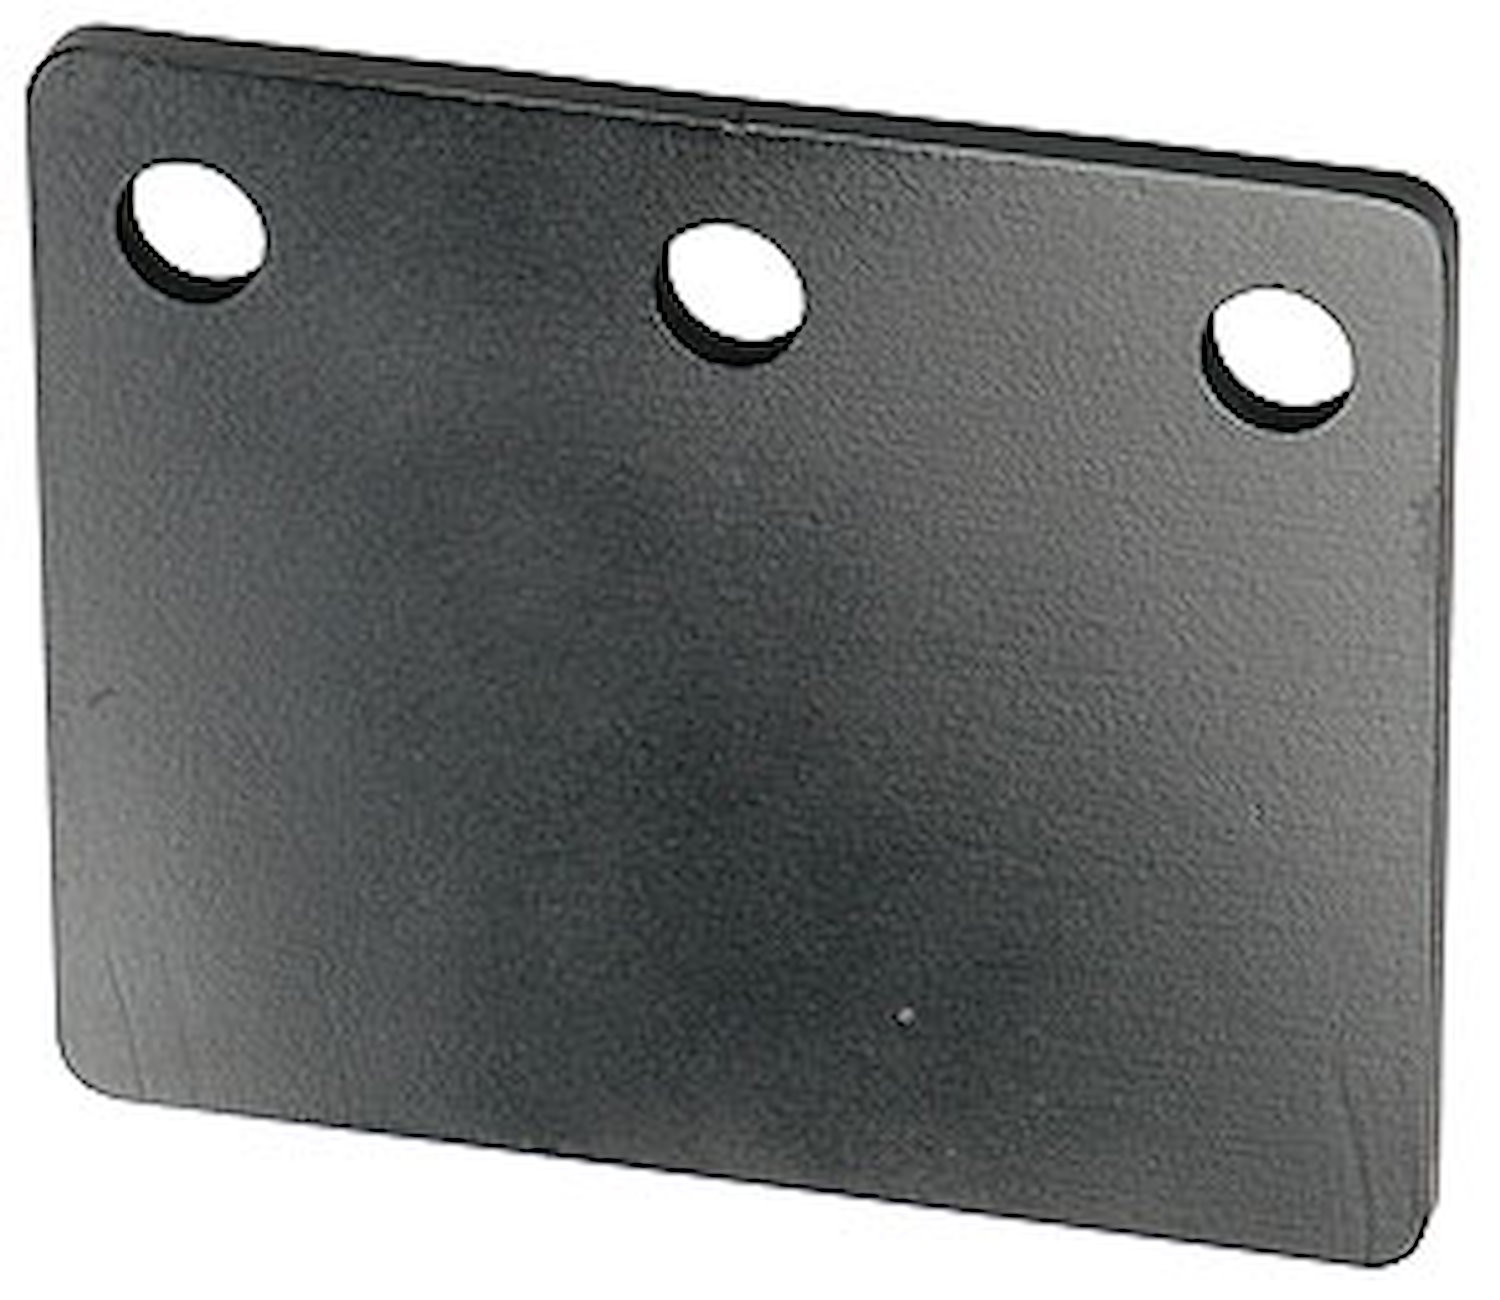 Flat Mounting Bracket For Use With 497-3301, 497-3303, 497-3310, 497-3311, 497-3313, 497-3350